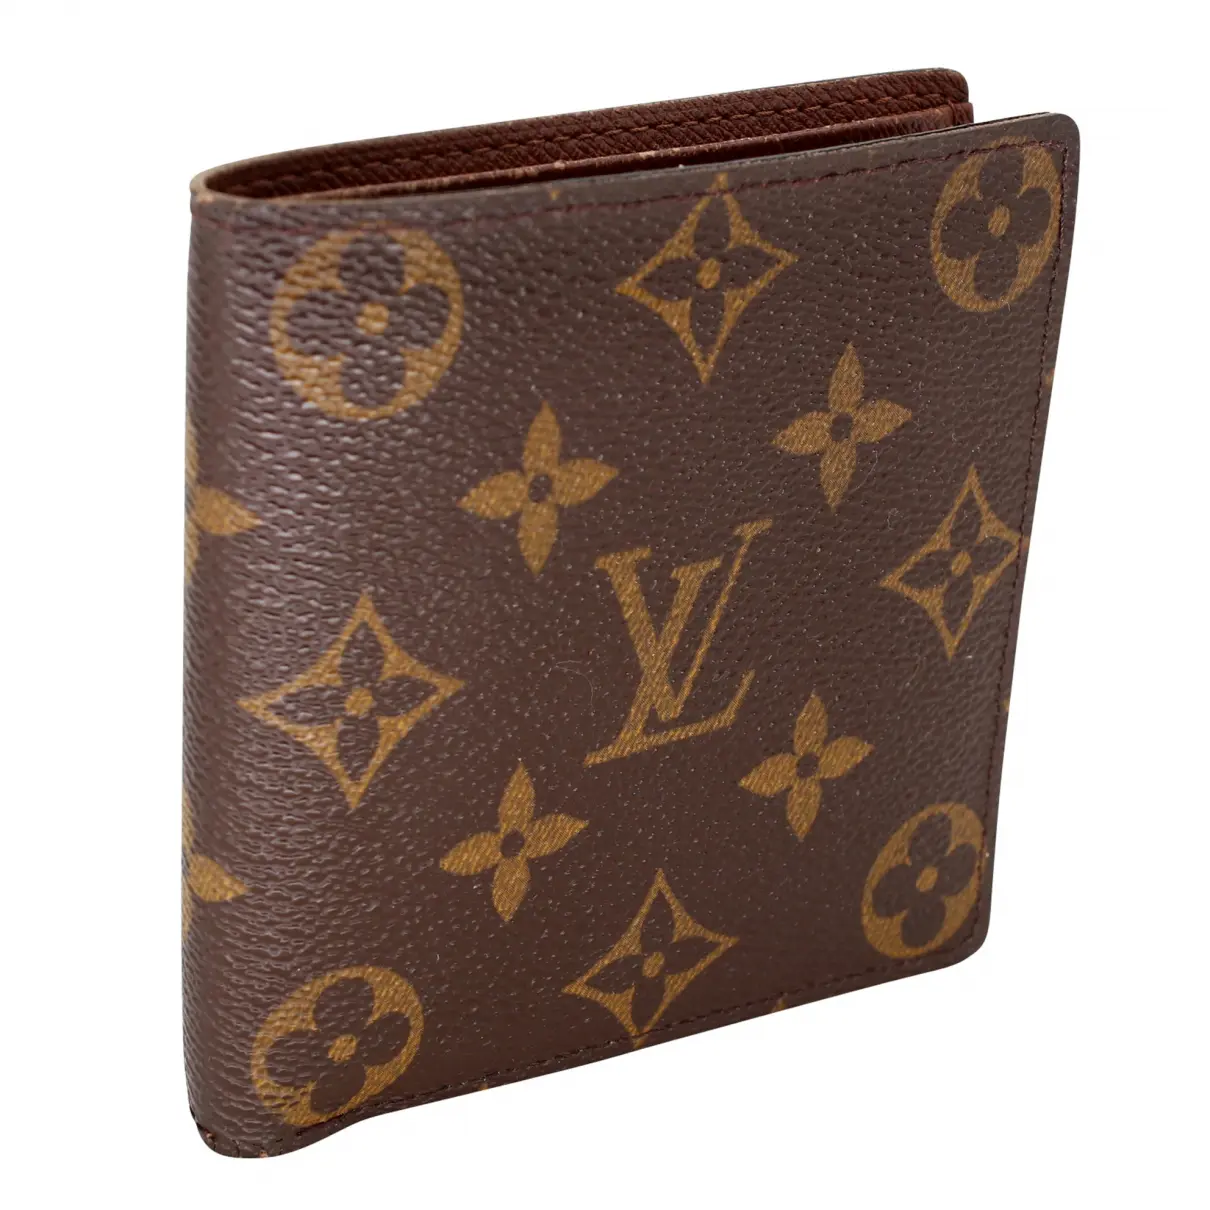 Buy Louis Vuitton Marco leather small bag online